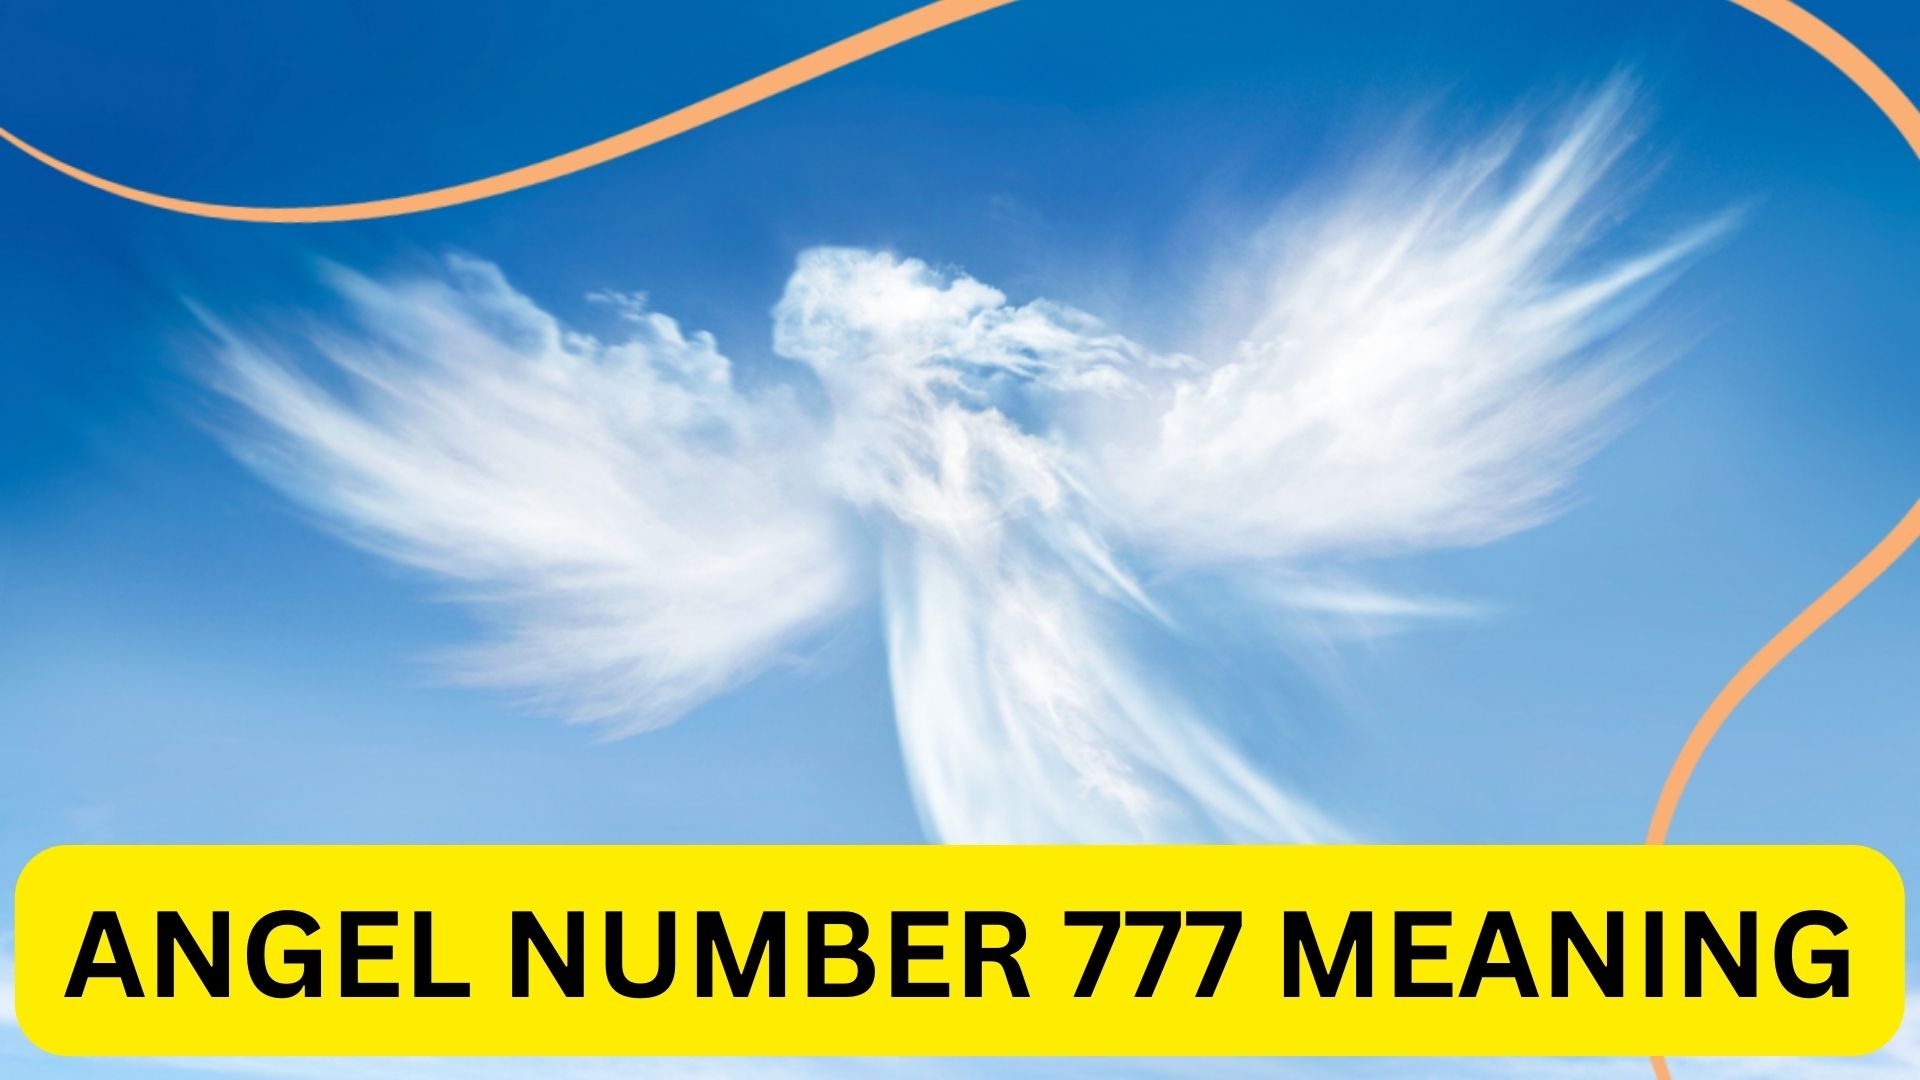 Angel Number 777 Meaning - Spiritual Significance And Symbolism